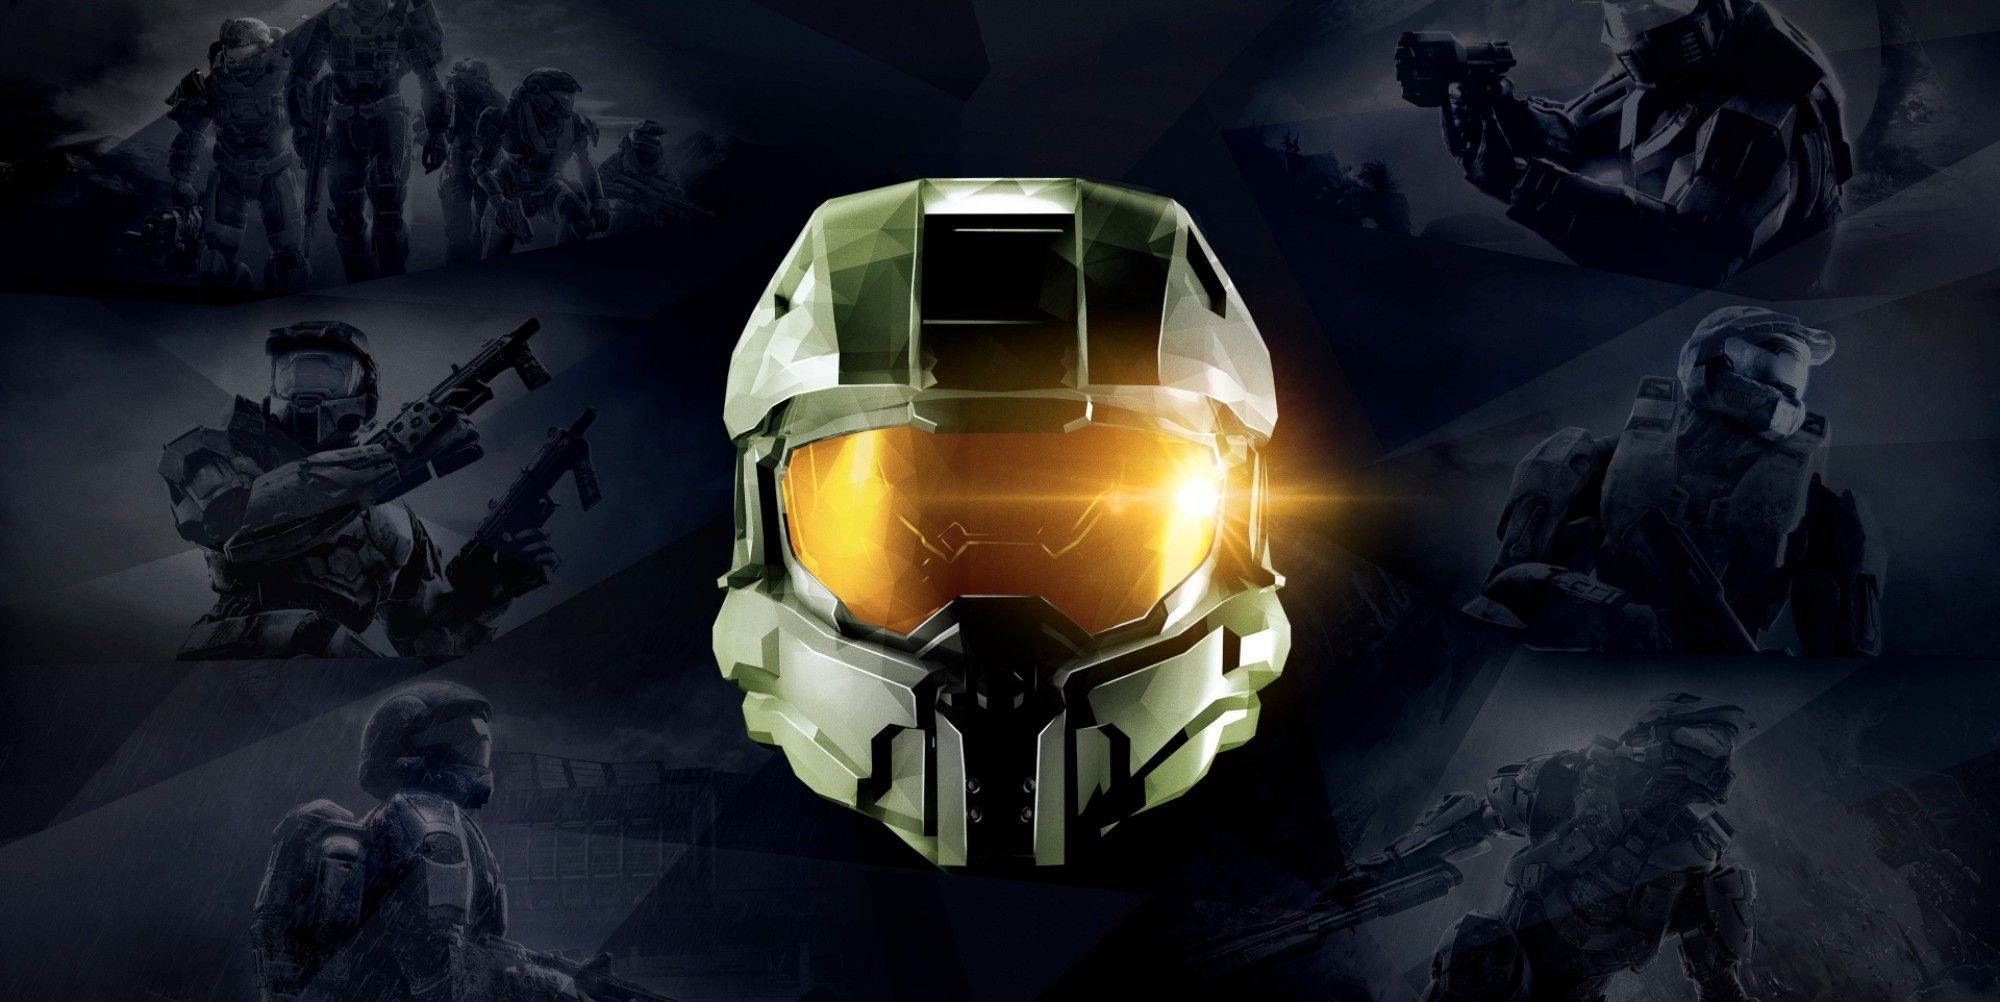 halo master chief collection